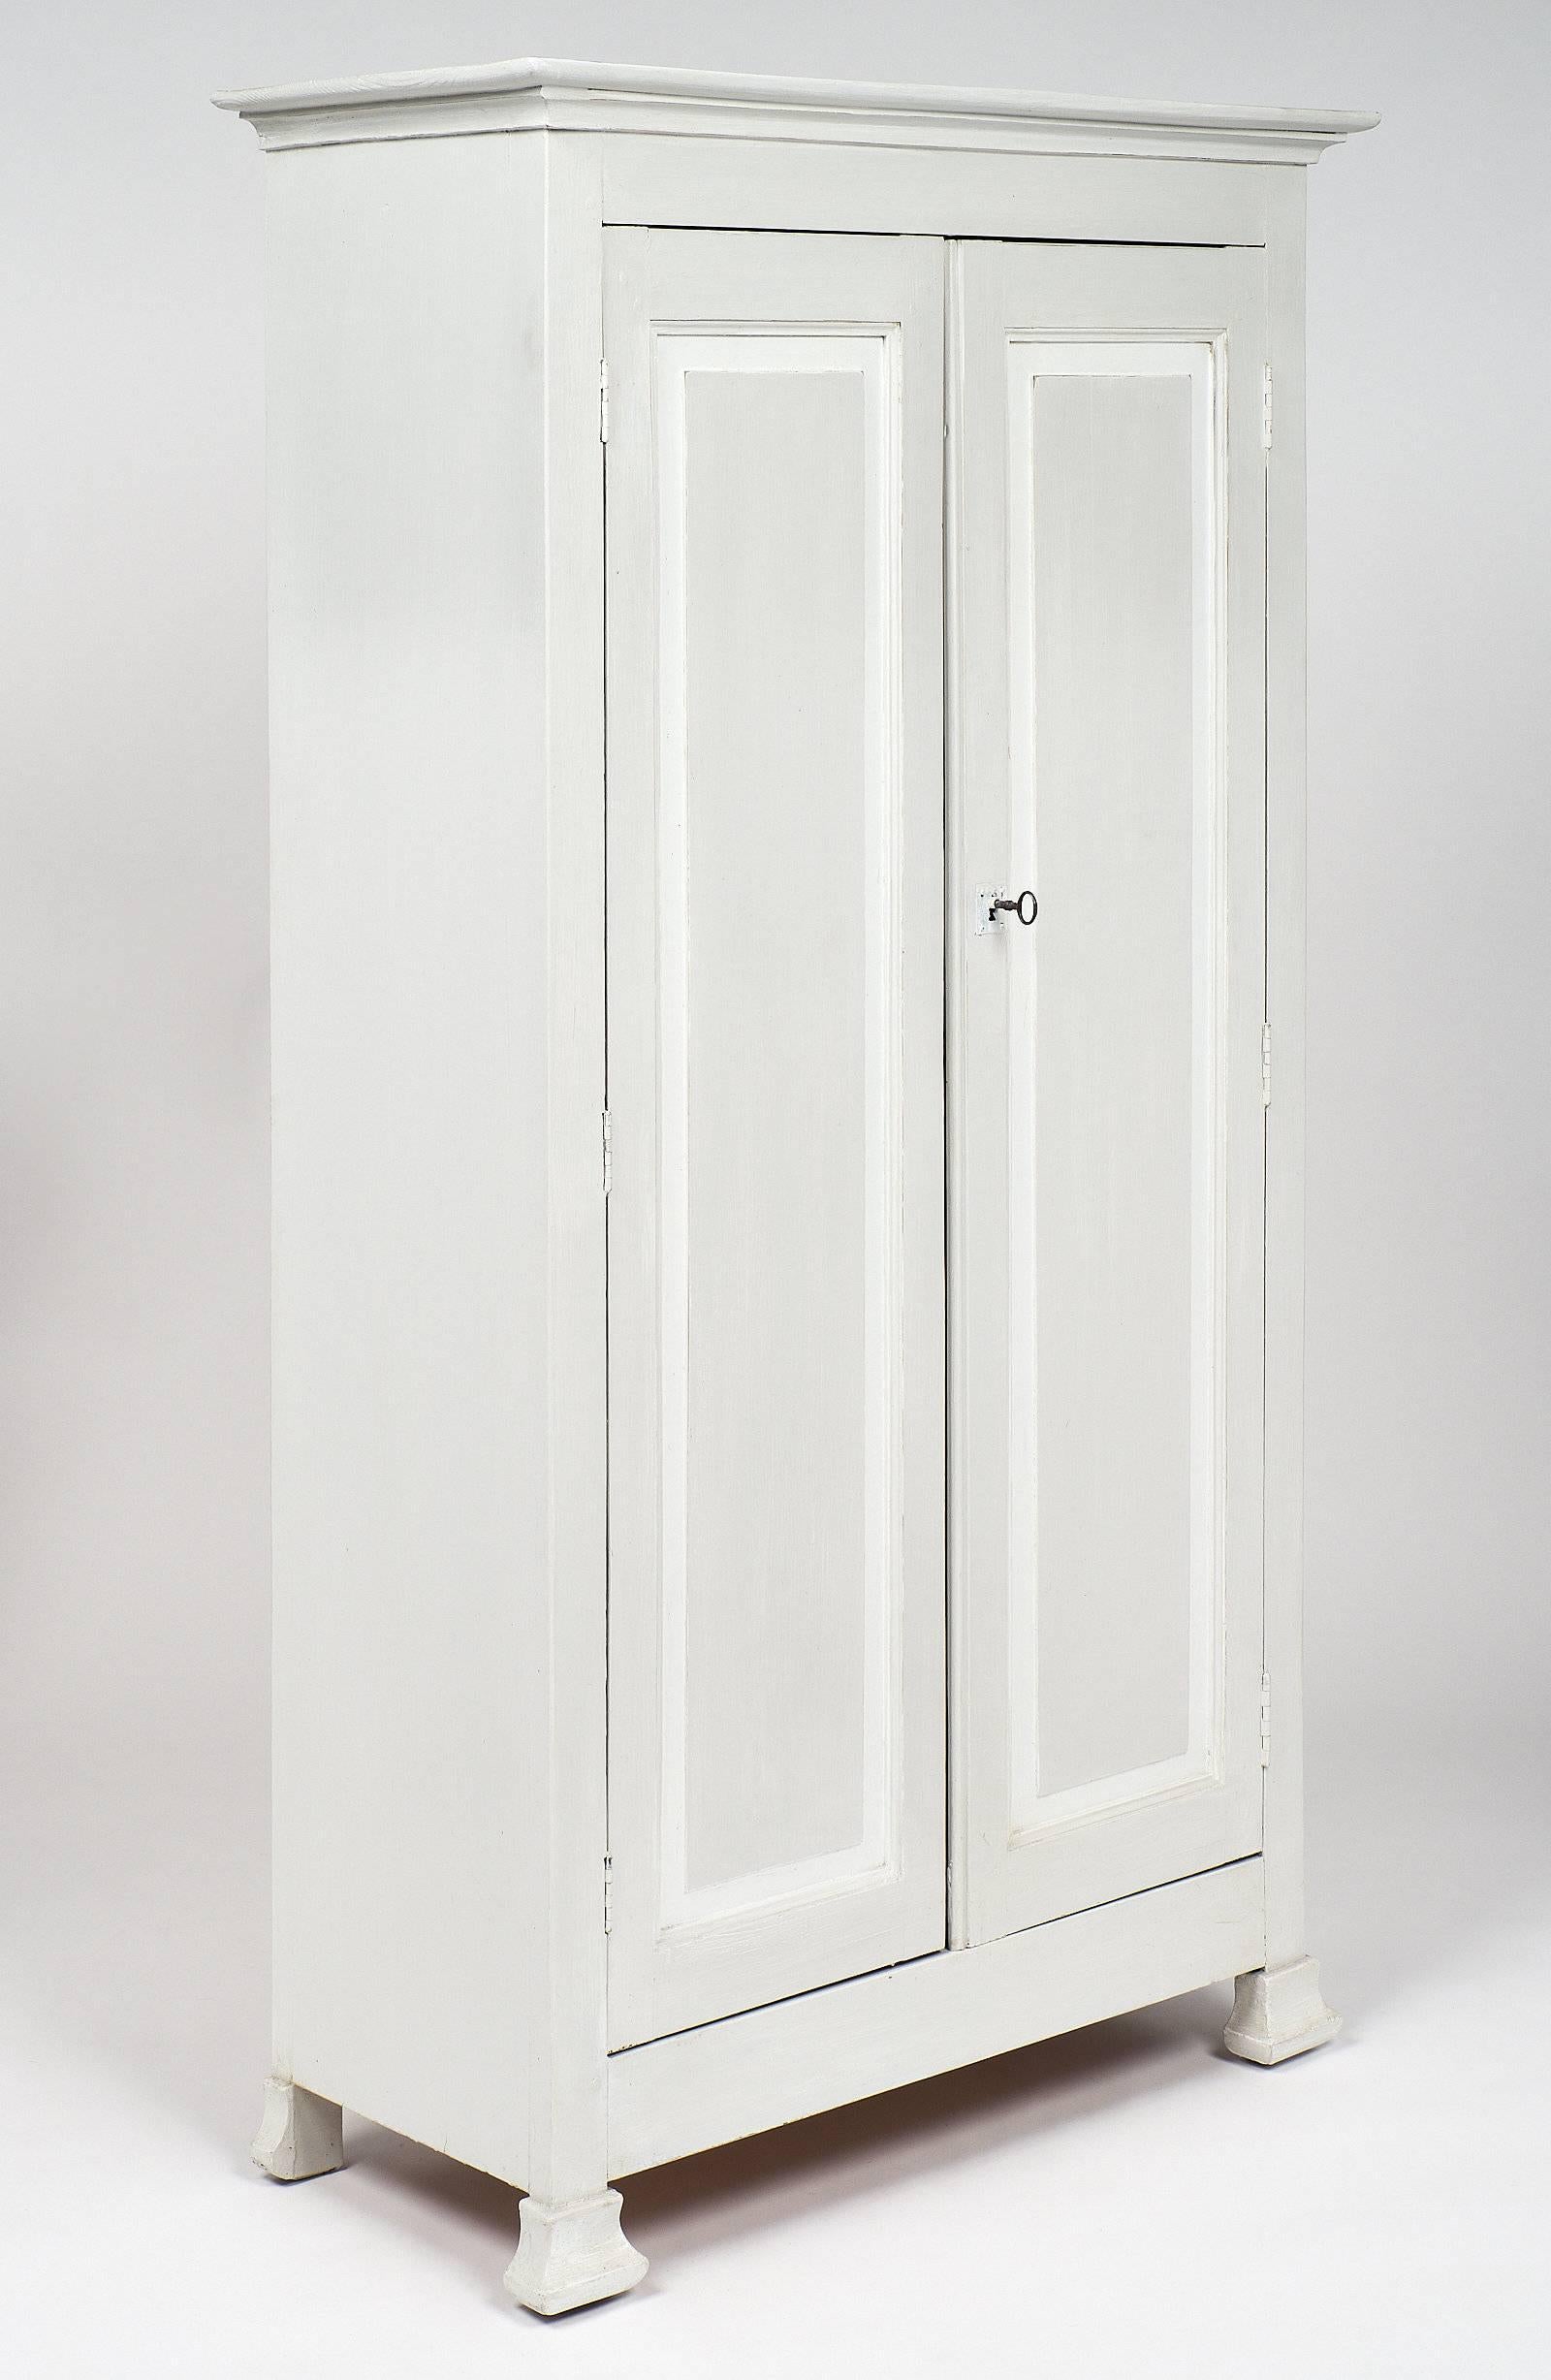 Classic armoire from the middle of the 19th century in France. This piece has a strong, impressive appearance with great lines and proportions of the Louis Philippe period. It stands on four feet and has trim around the top for detail. Two doors